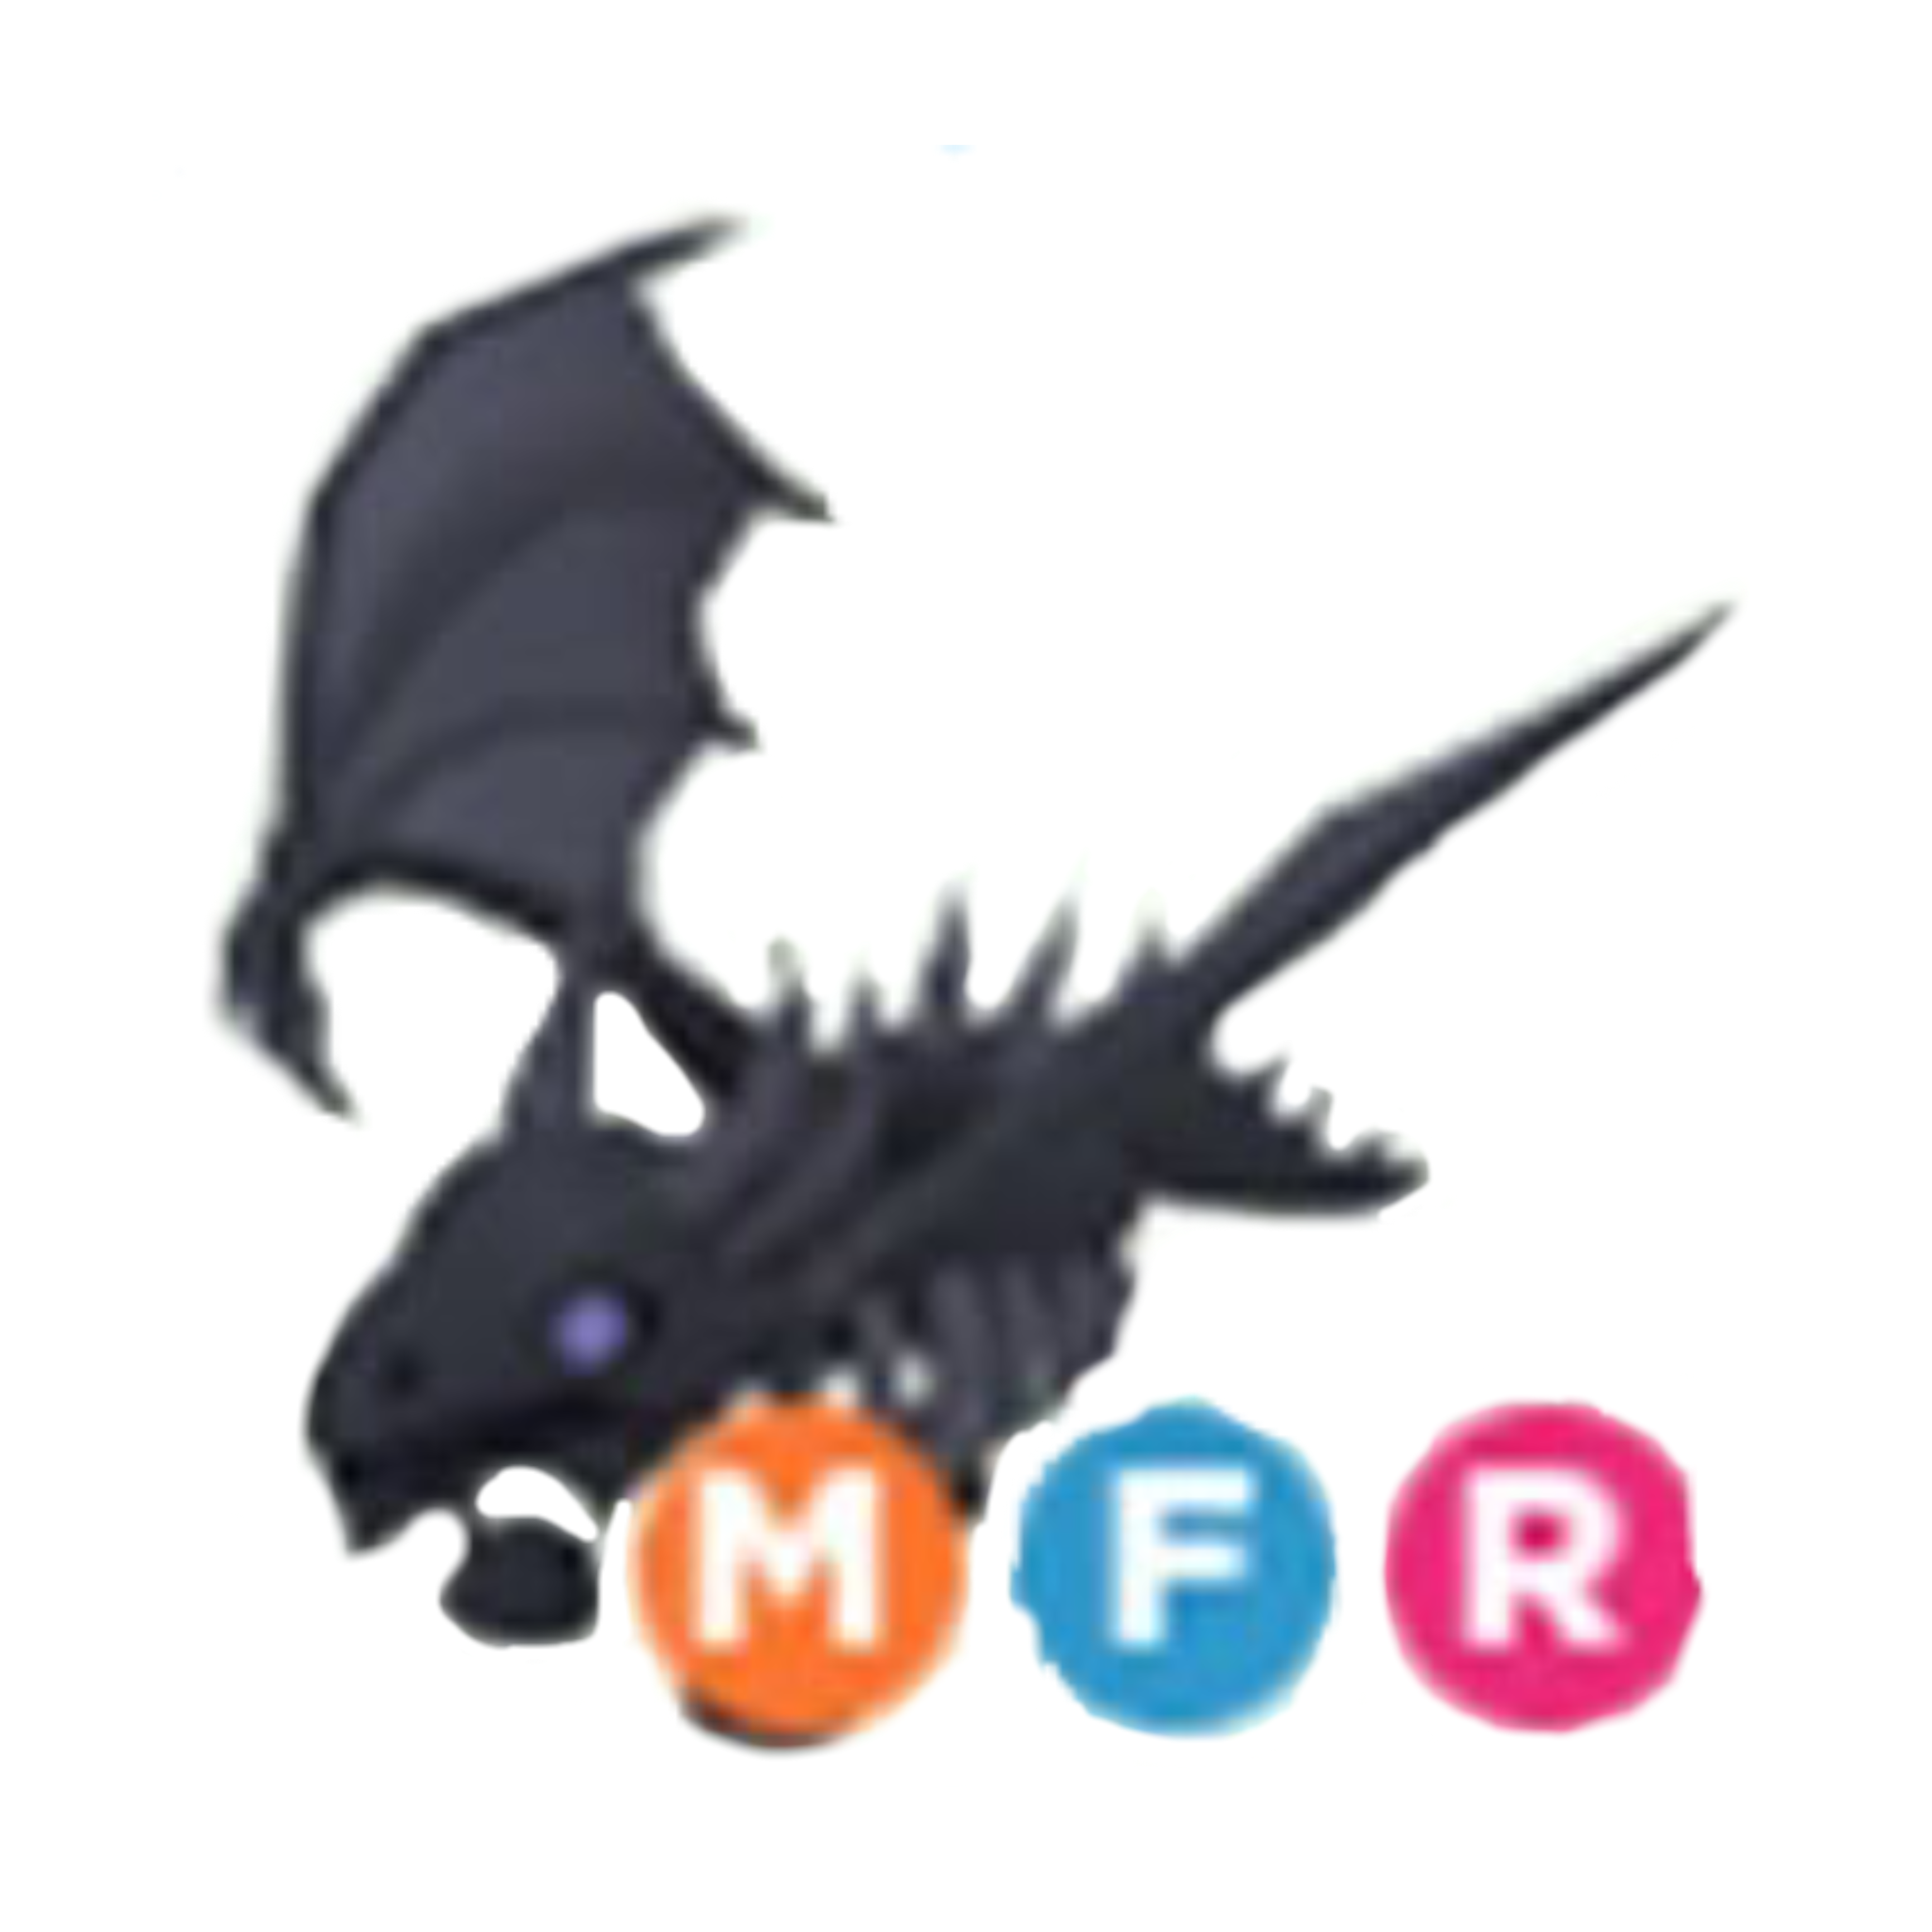 Adopt Me Adoptme Dragon Shadow Sticker By Angle - roblox adopt me shadow dragon sticker choose matt or glossy etsy